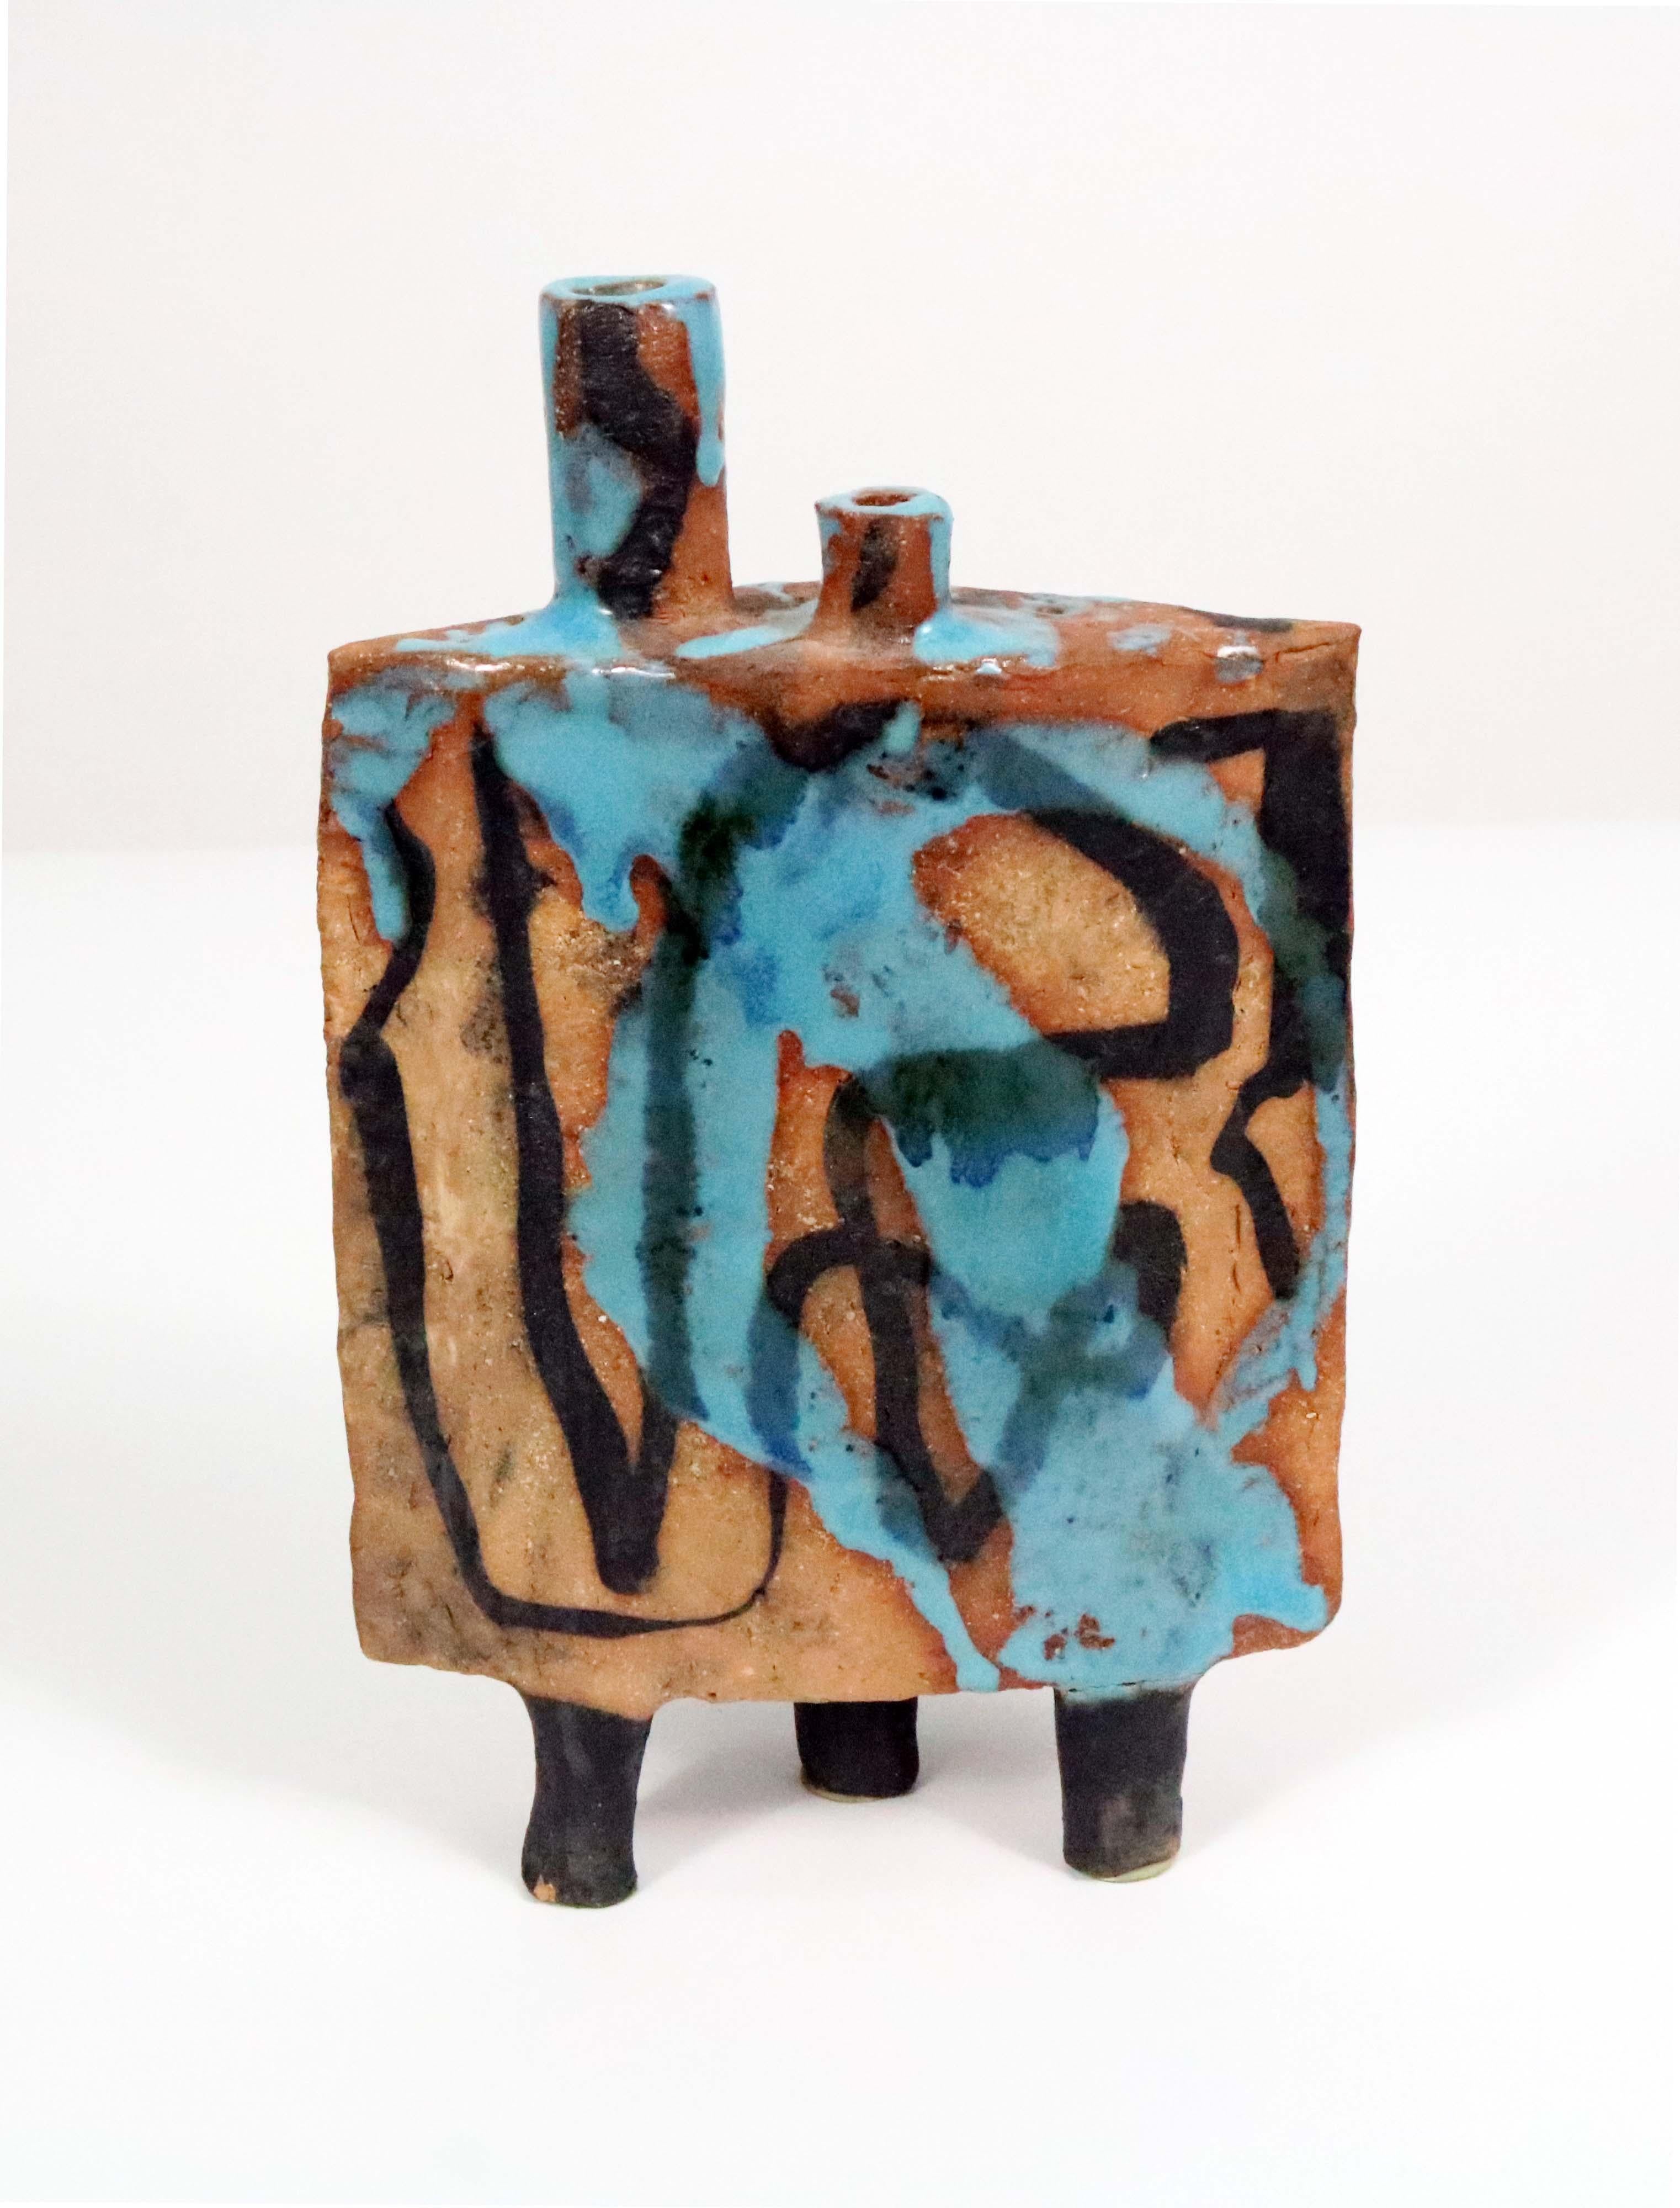 Fired Midcentury Abstract Sculpture by California Studio Potter Win Ng